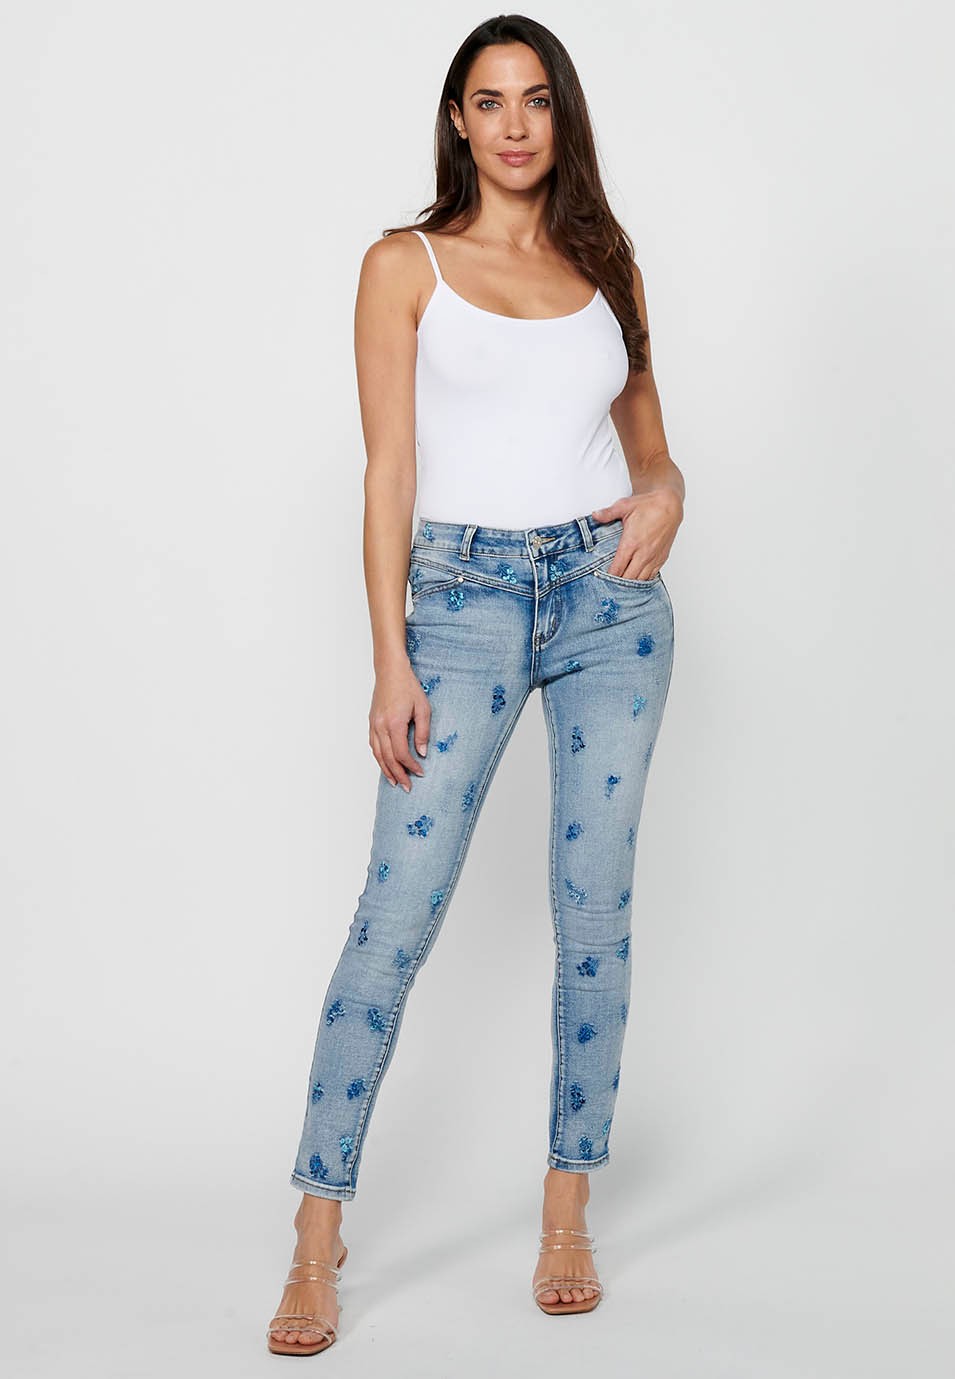 Slim long pants with front zipper and button closure with floral embroidery in Light Blue for Women